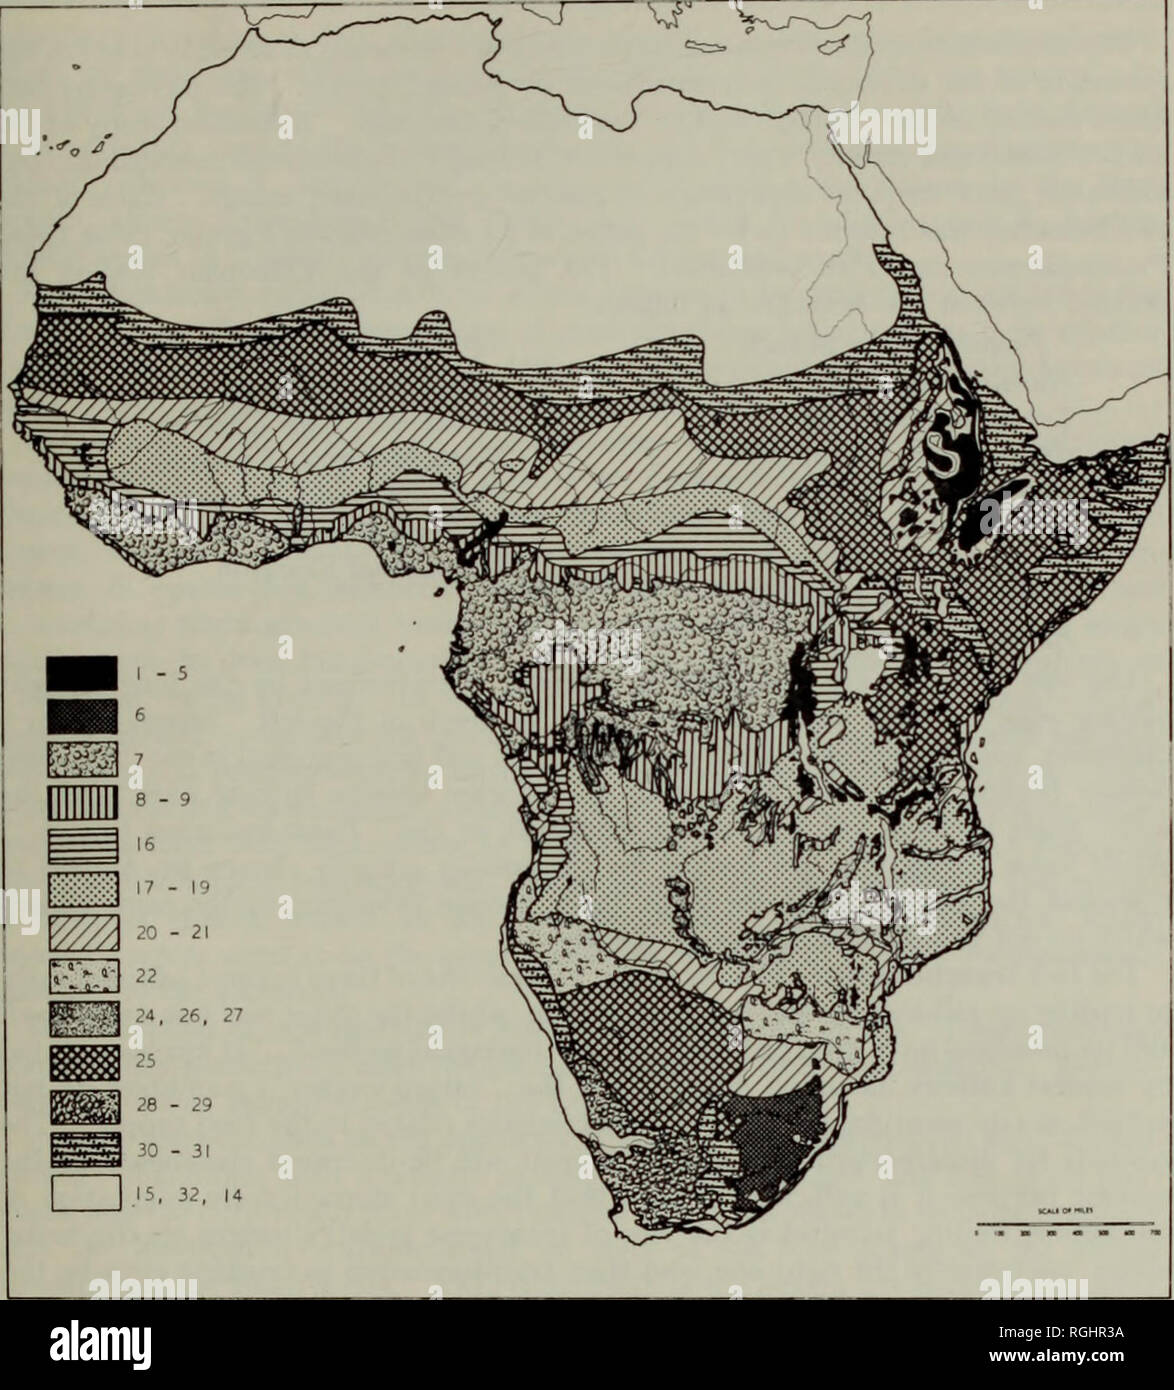 . Bulletin of the British Museum (Natural History) Entom Supp. ETHIOPIAN XASL'TITERMITIX 1.. Map 2. Vegetation of Africa showing divisions significant in termite distribution. (1-5), montane types ; (6), temperate and subtropical grassland ; (7), moist forest at low and medium altitudes ; (8-9), forest-savannah mosaic ; (16), moist woodlands ; (17-19), Isoberlinia and Brachystegia-Julbernardia woodlands and savannahs ; (20-21), relatively dry savannah-woodlands ; (22), woodland with abundant Colophospermum mopane ; (24, 26, and 27), grass steppes ; (25), wooded steppe with abundant Acacia and Stock Photo